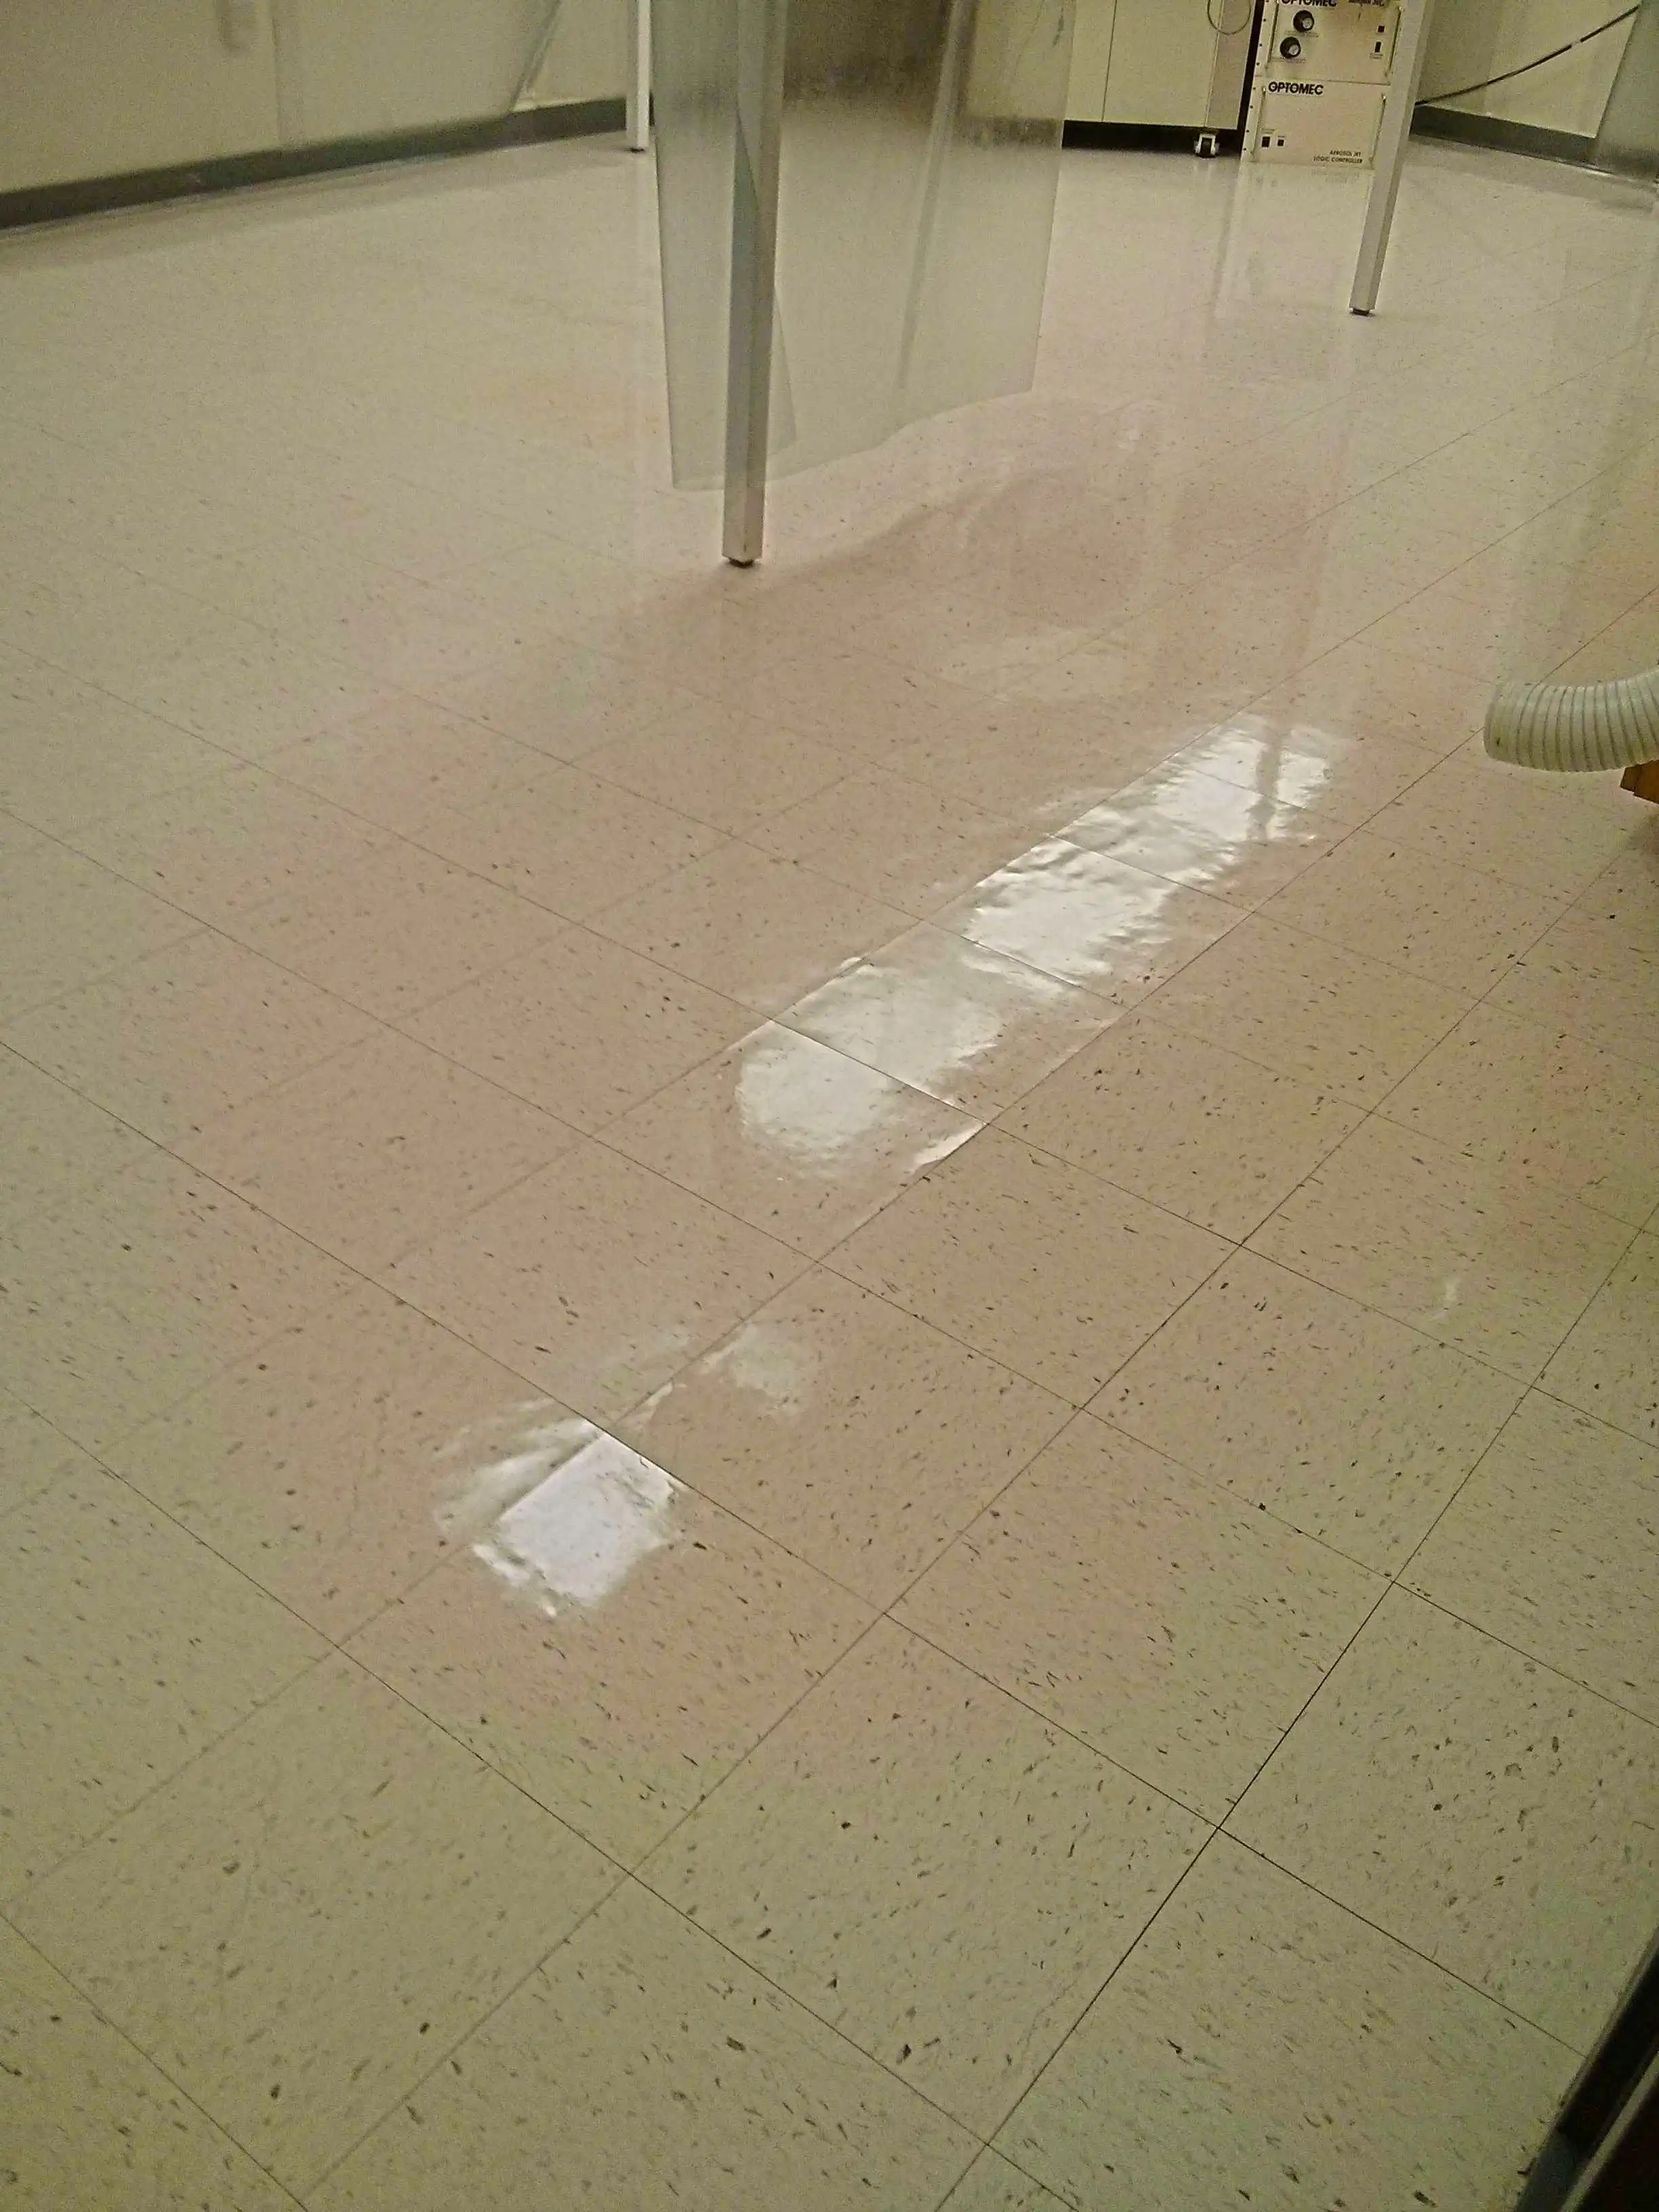 vct-floor-coatings-services-in-minneapolis-medical-manufacturing-facility